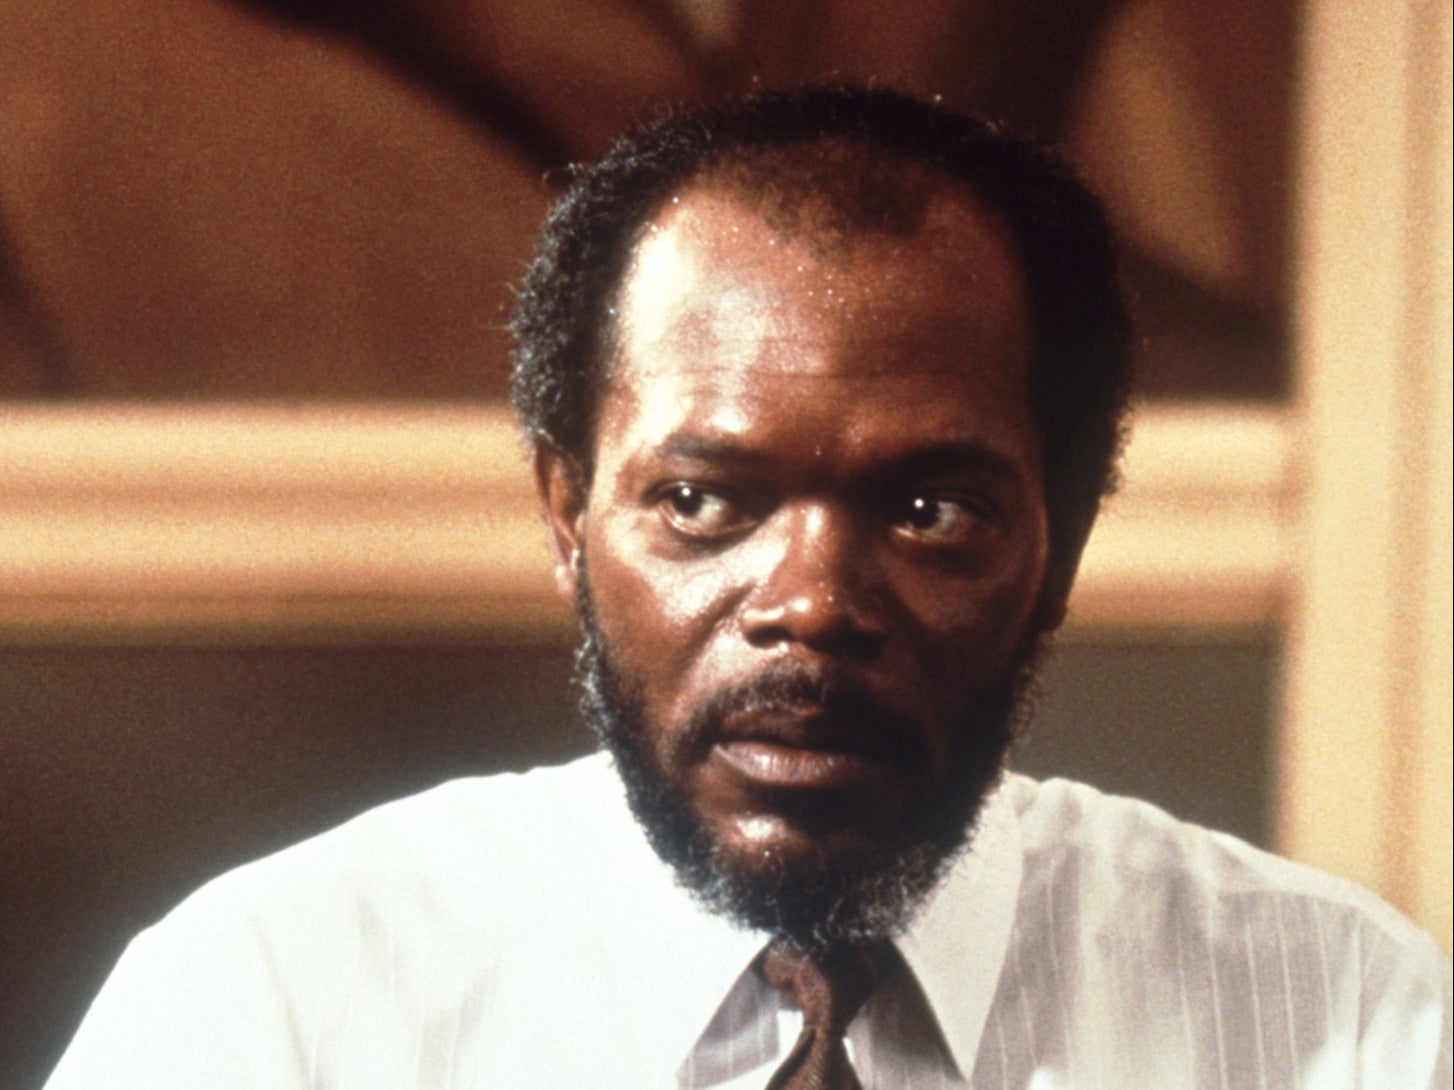 Samuel L Jackson in ‘A Time to Kill'